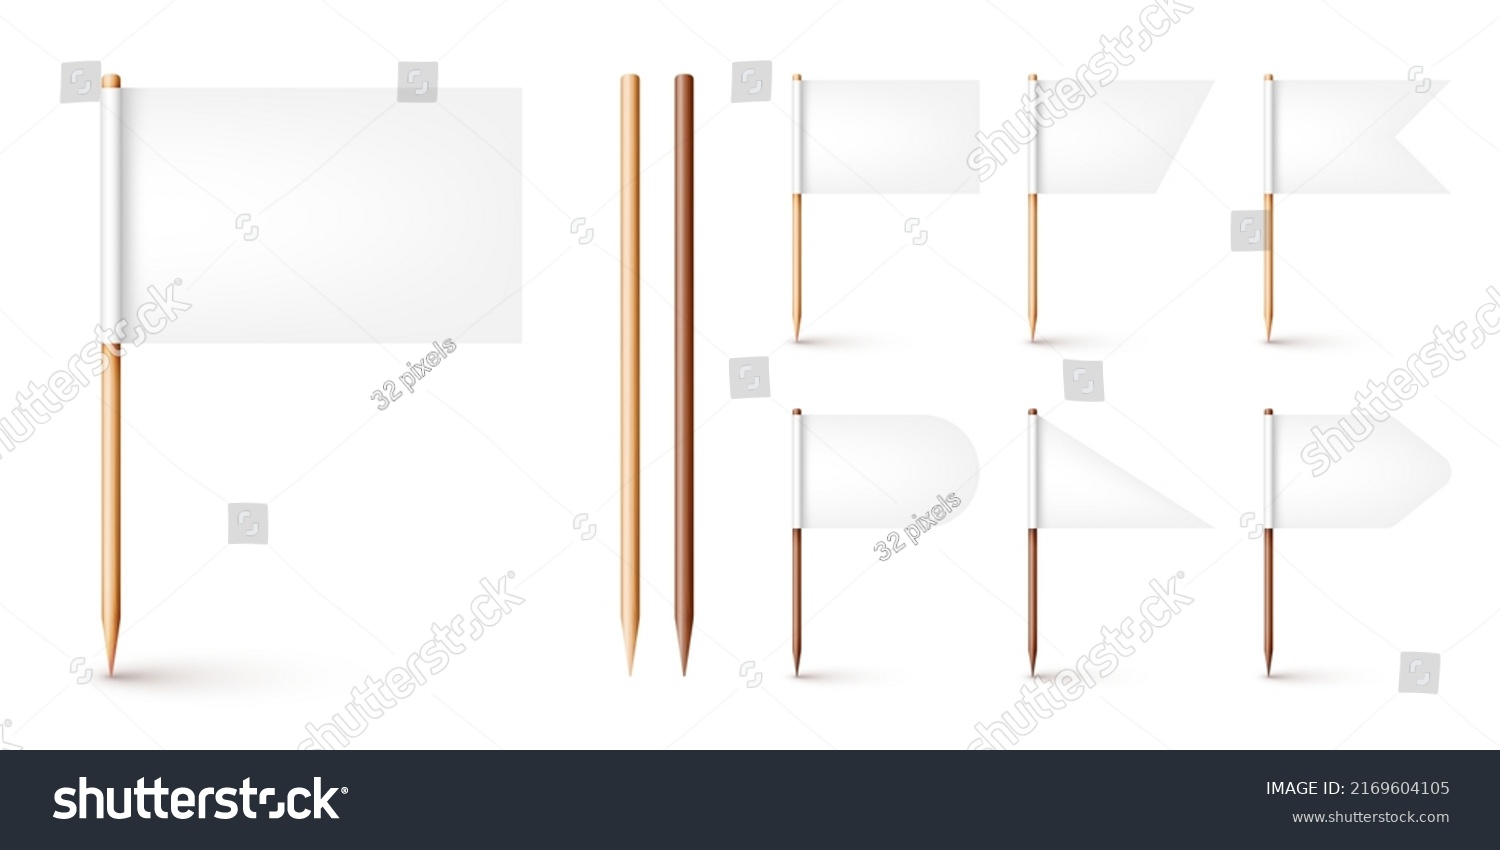 SVG of Realistic various toothpick flags. Wooden toothpicks with white paper flag. Location mark, map pointer. Blank mockup for advertising and promotions. Vector illustration svg